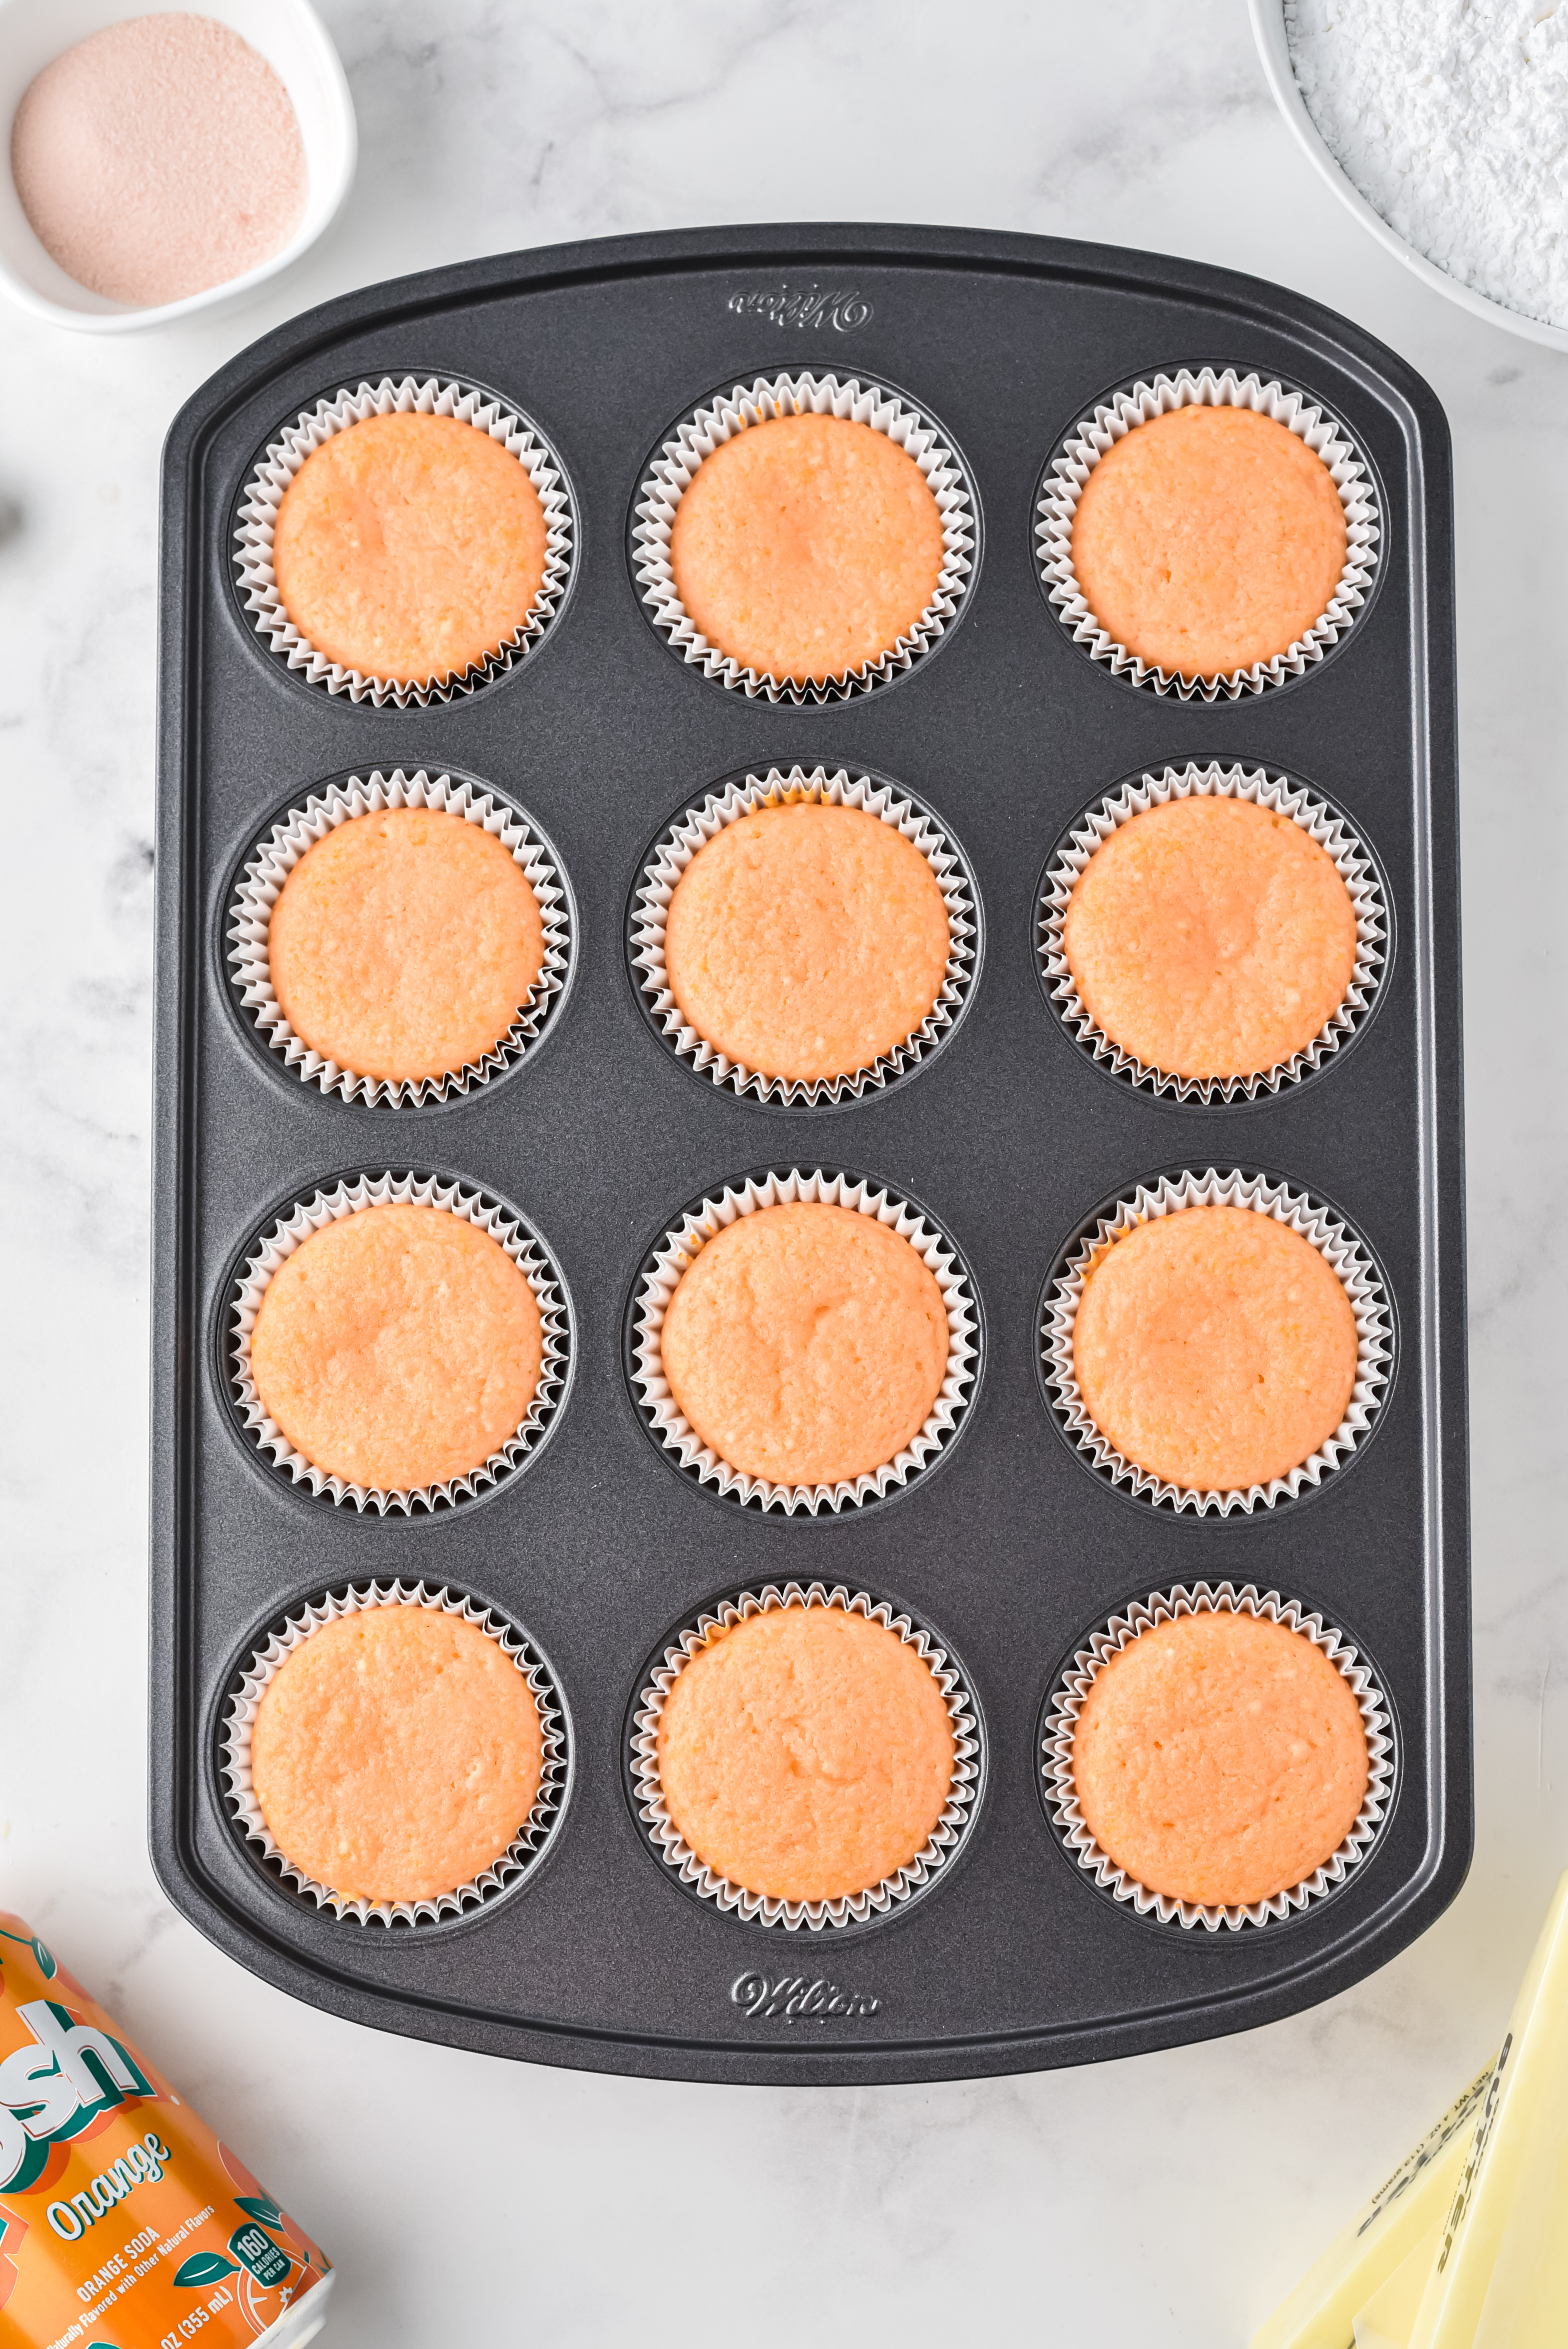 12 cake cupcake tray filled with freshly baked cupcakes in white paper liners.